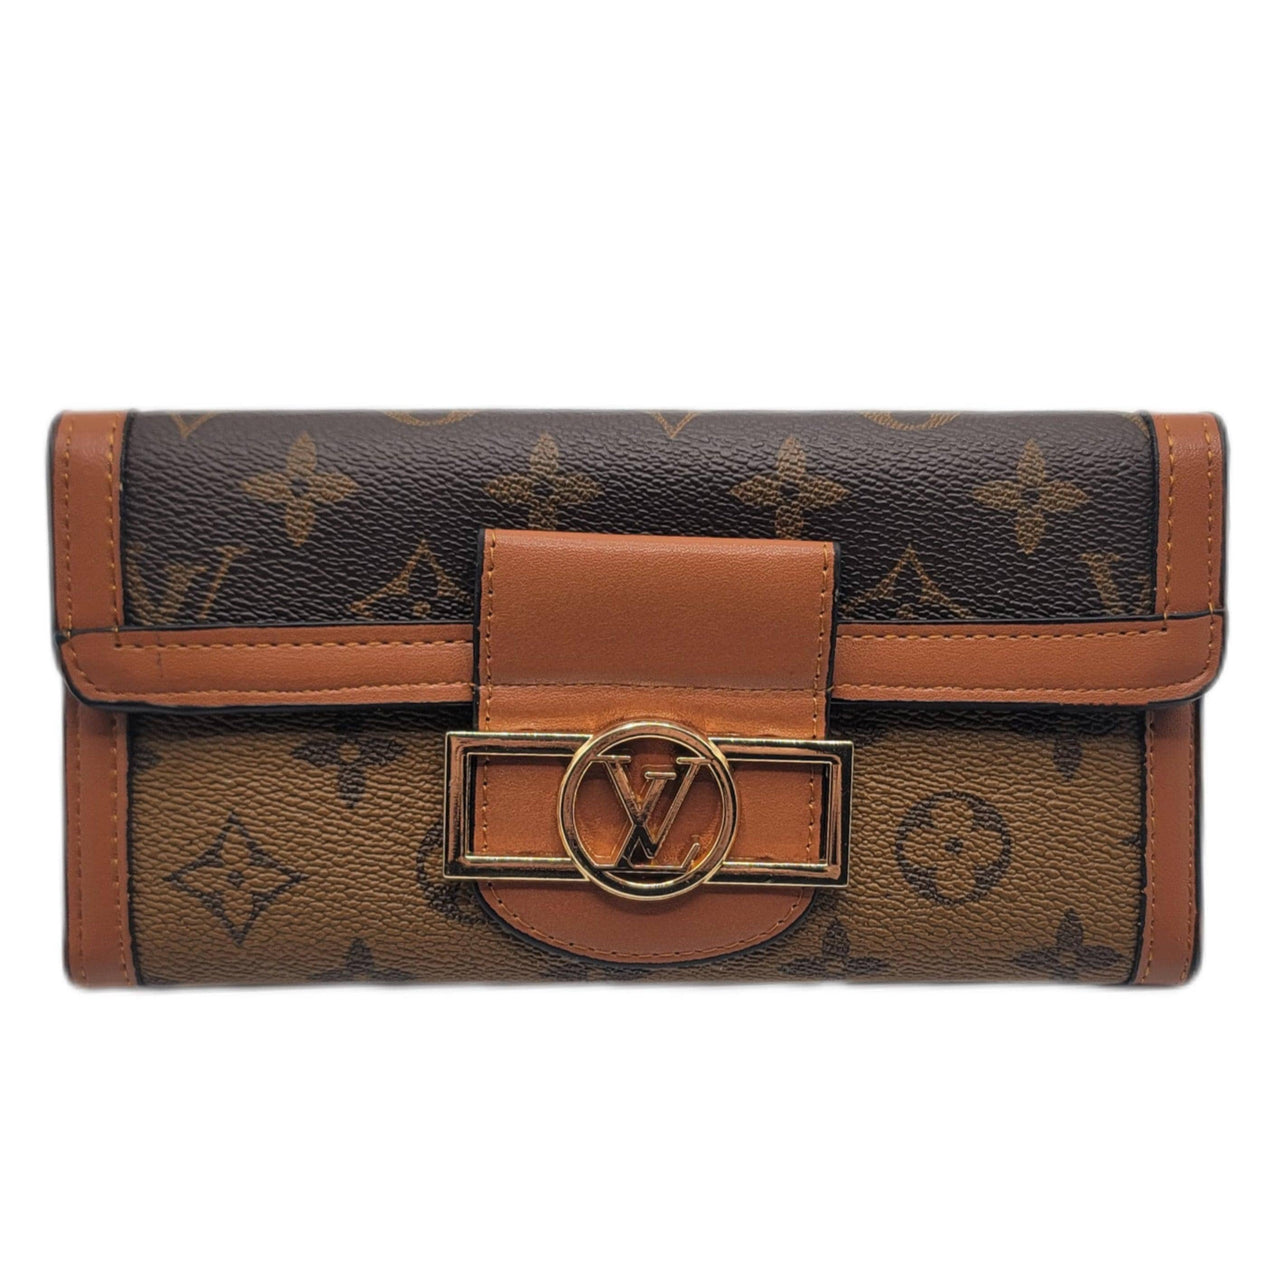 The Bag Couture Luggage & Bags Louis Vuitton 3 Fold Wallet Two Tone